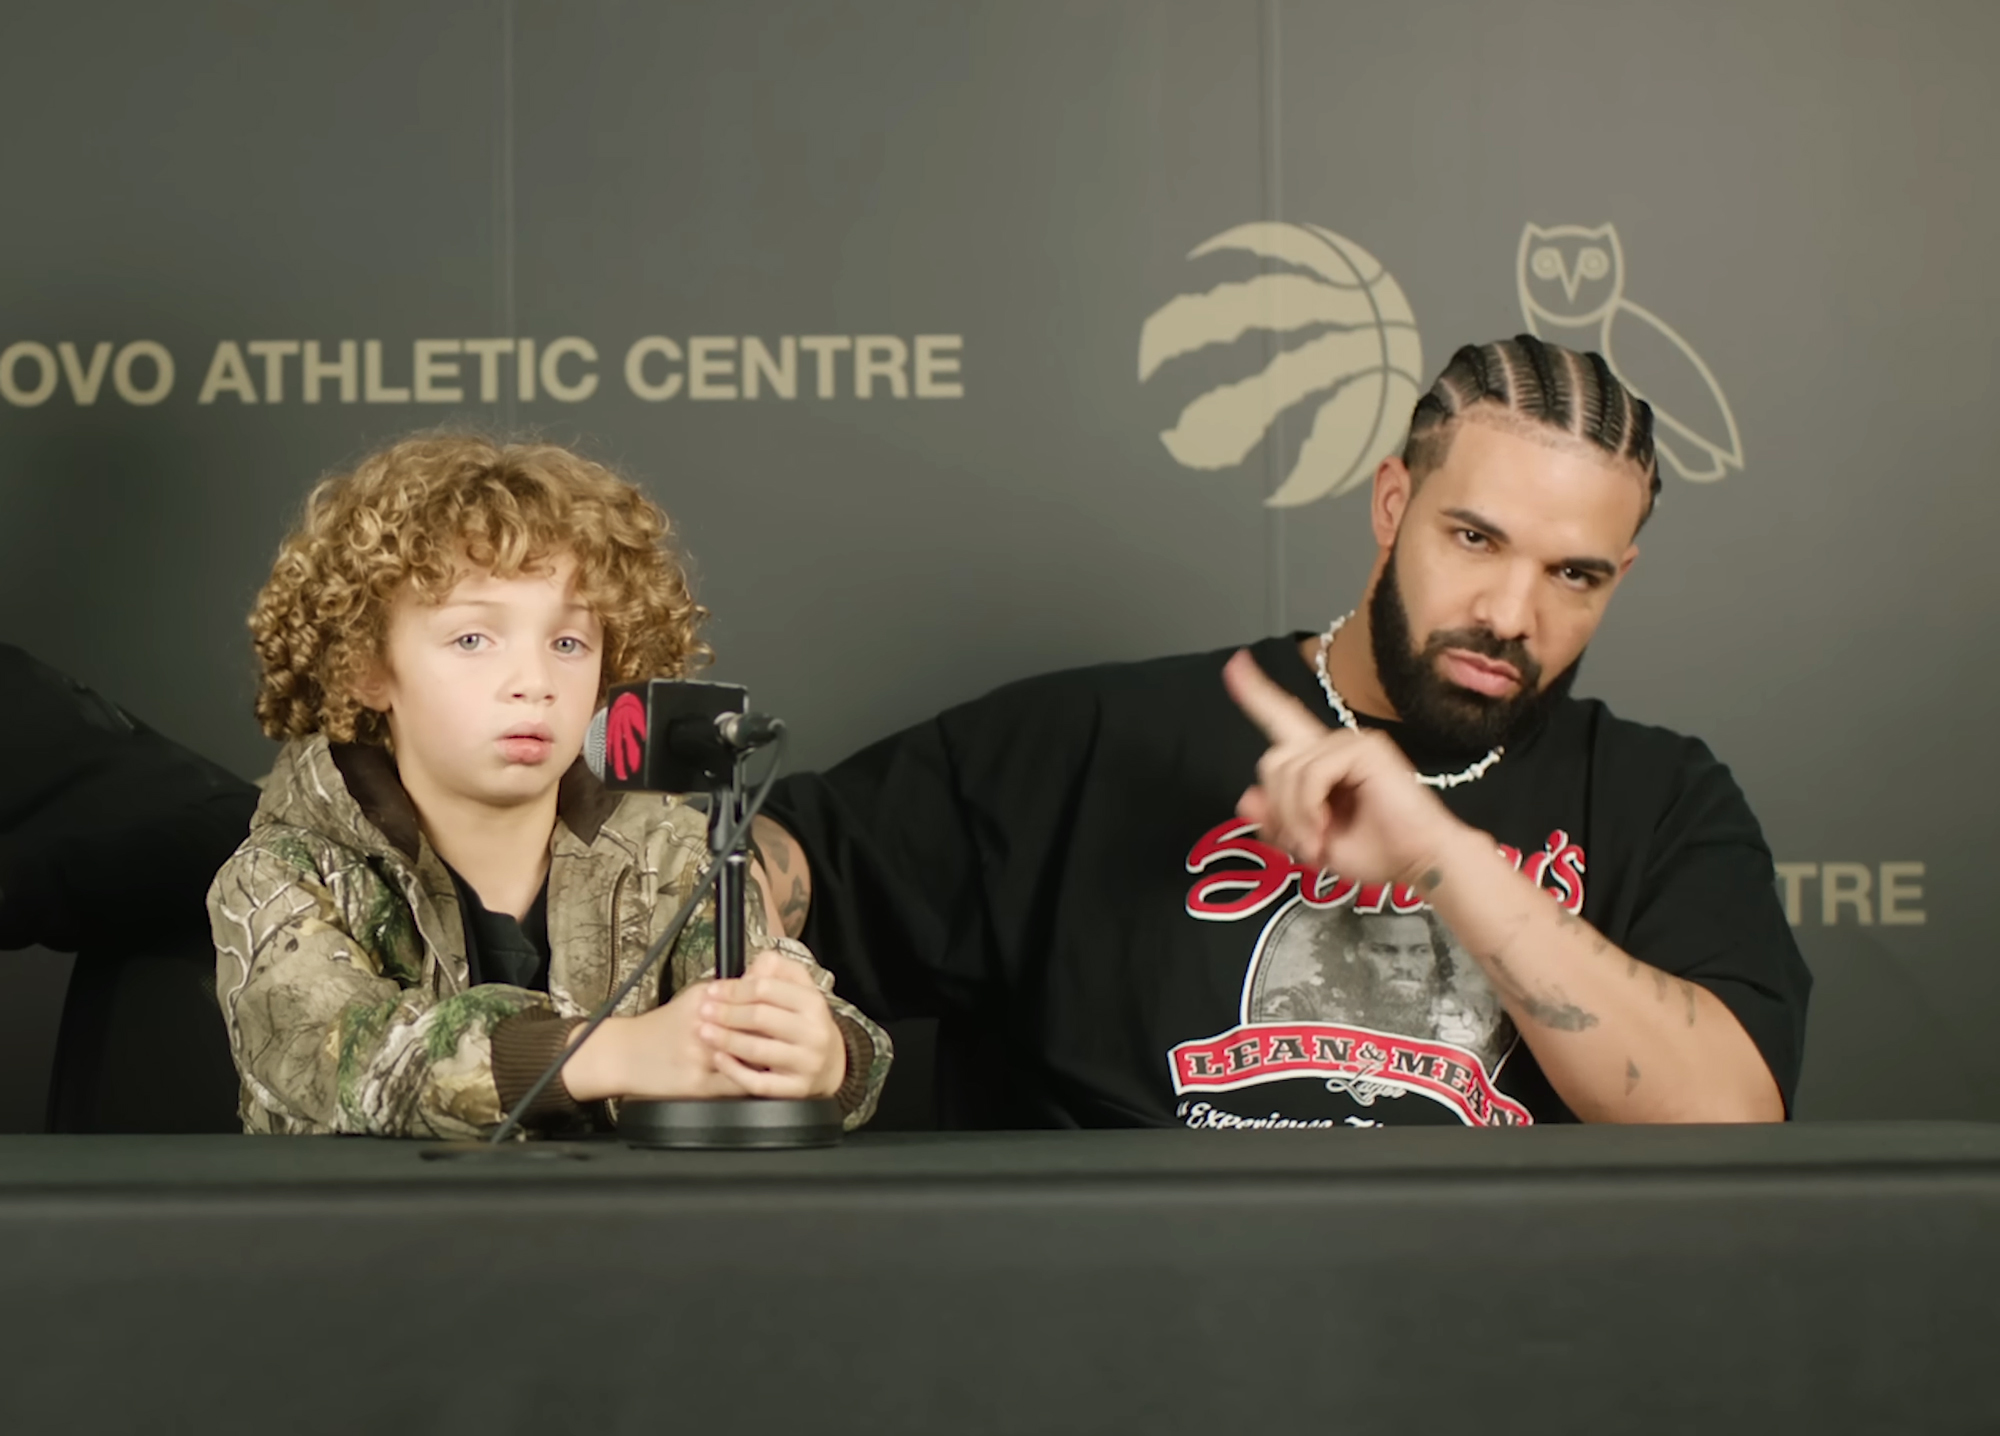 Drakes Son Adonis Rocks A Tattoo Of His Dads Face In 1st Music Video